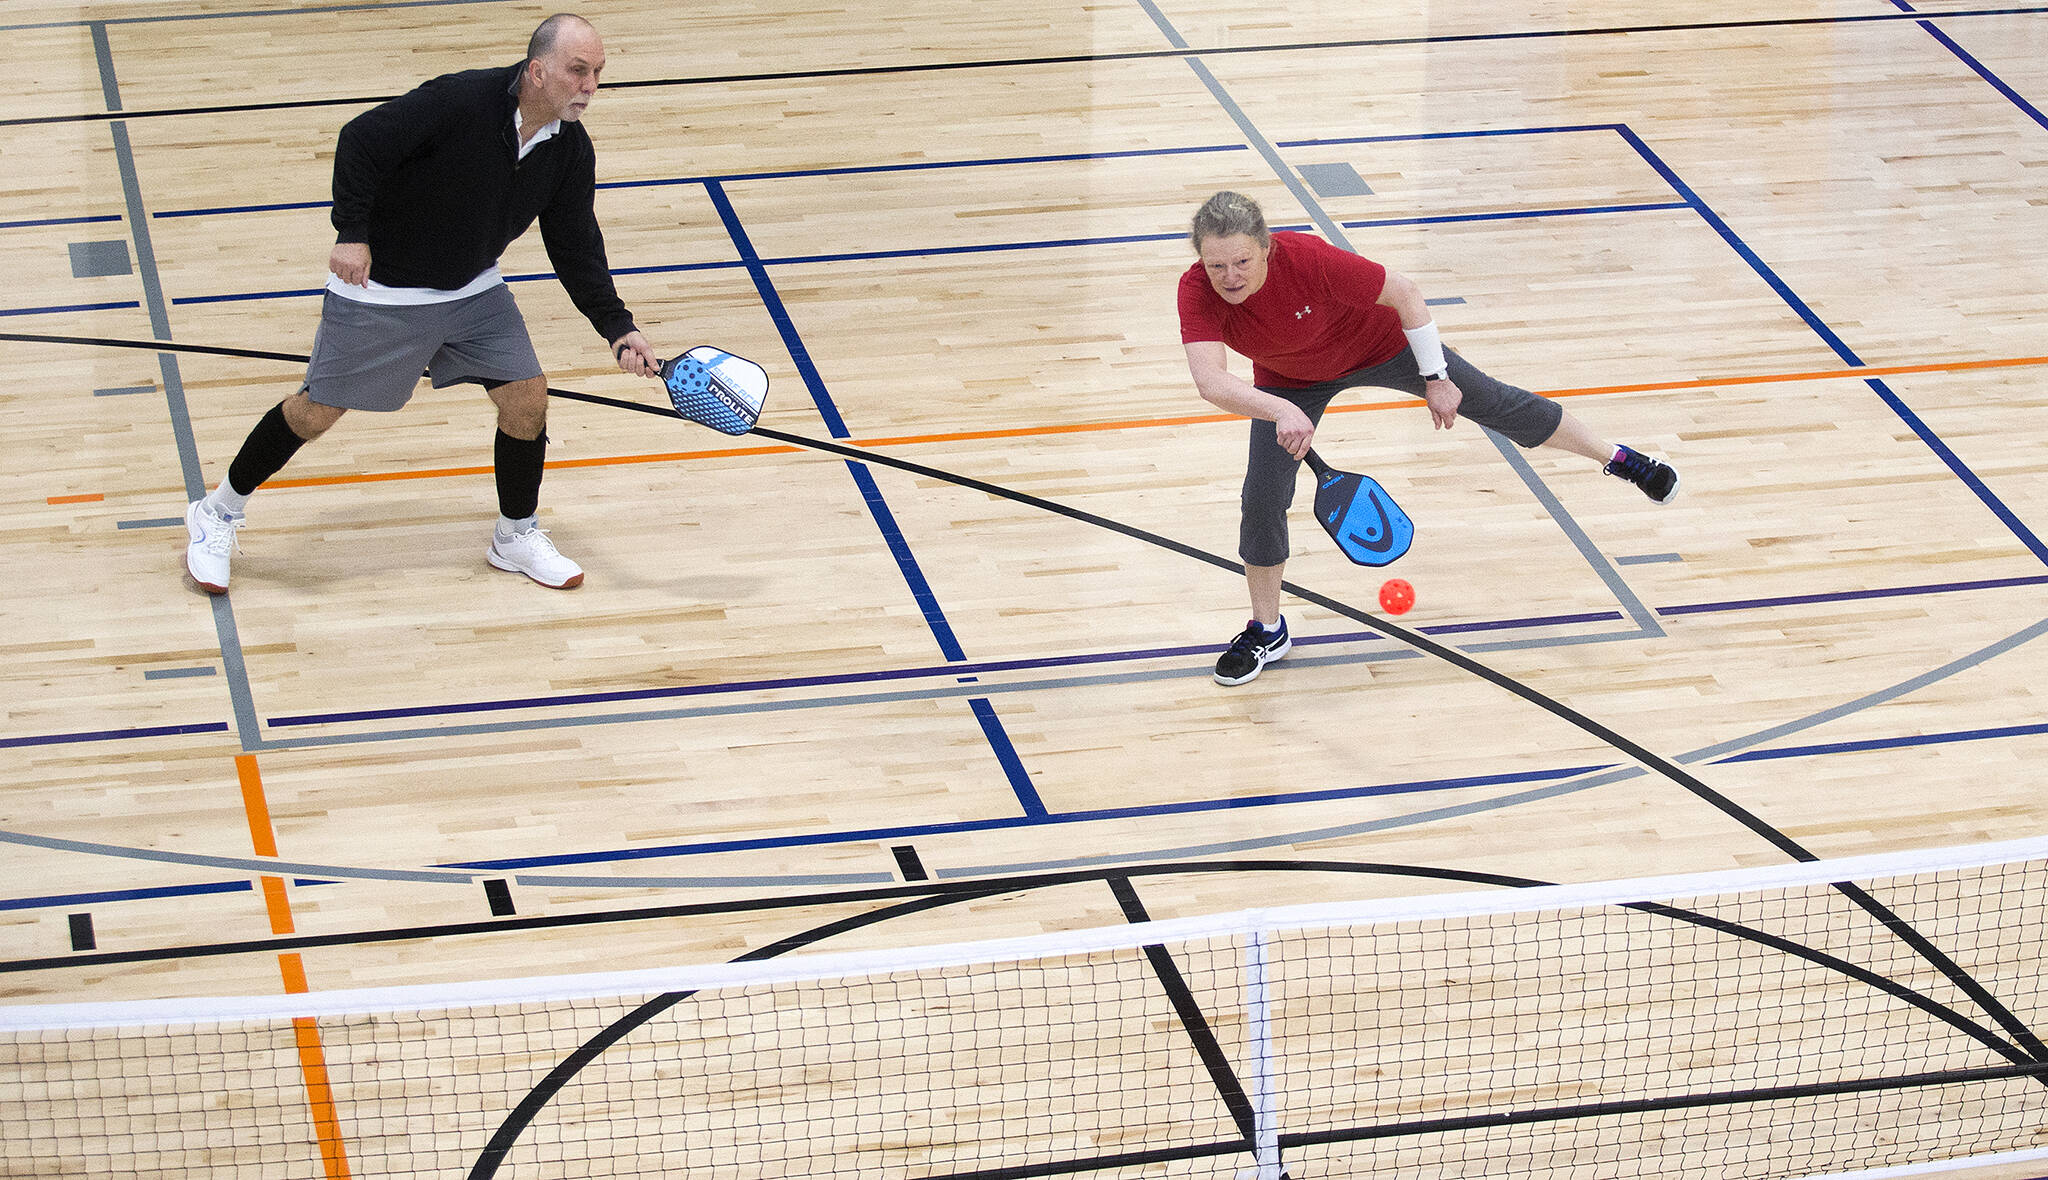 Kathy Kamel returns a volley as teammate George Jones backs her up during a pickleball game at the Everett YMCA on in February, 2020 in Everett. (Andy Bronson / The Herald file photo)